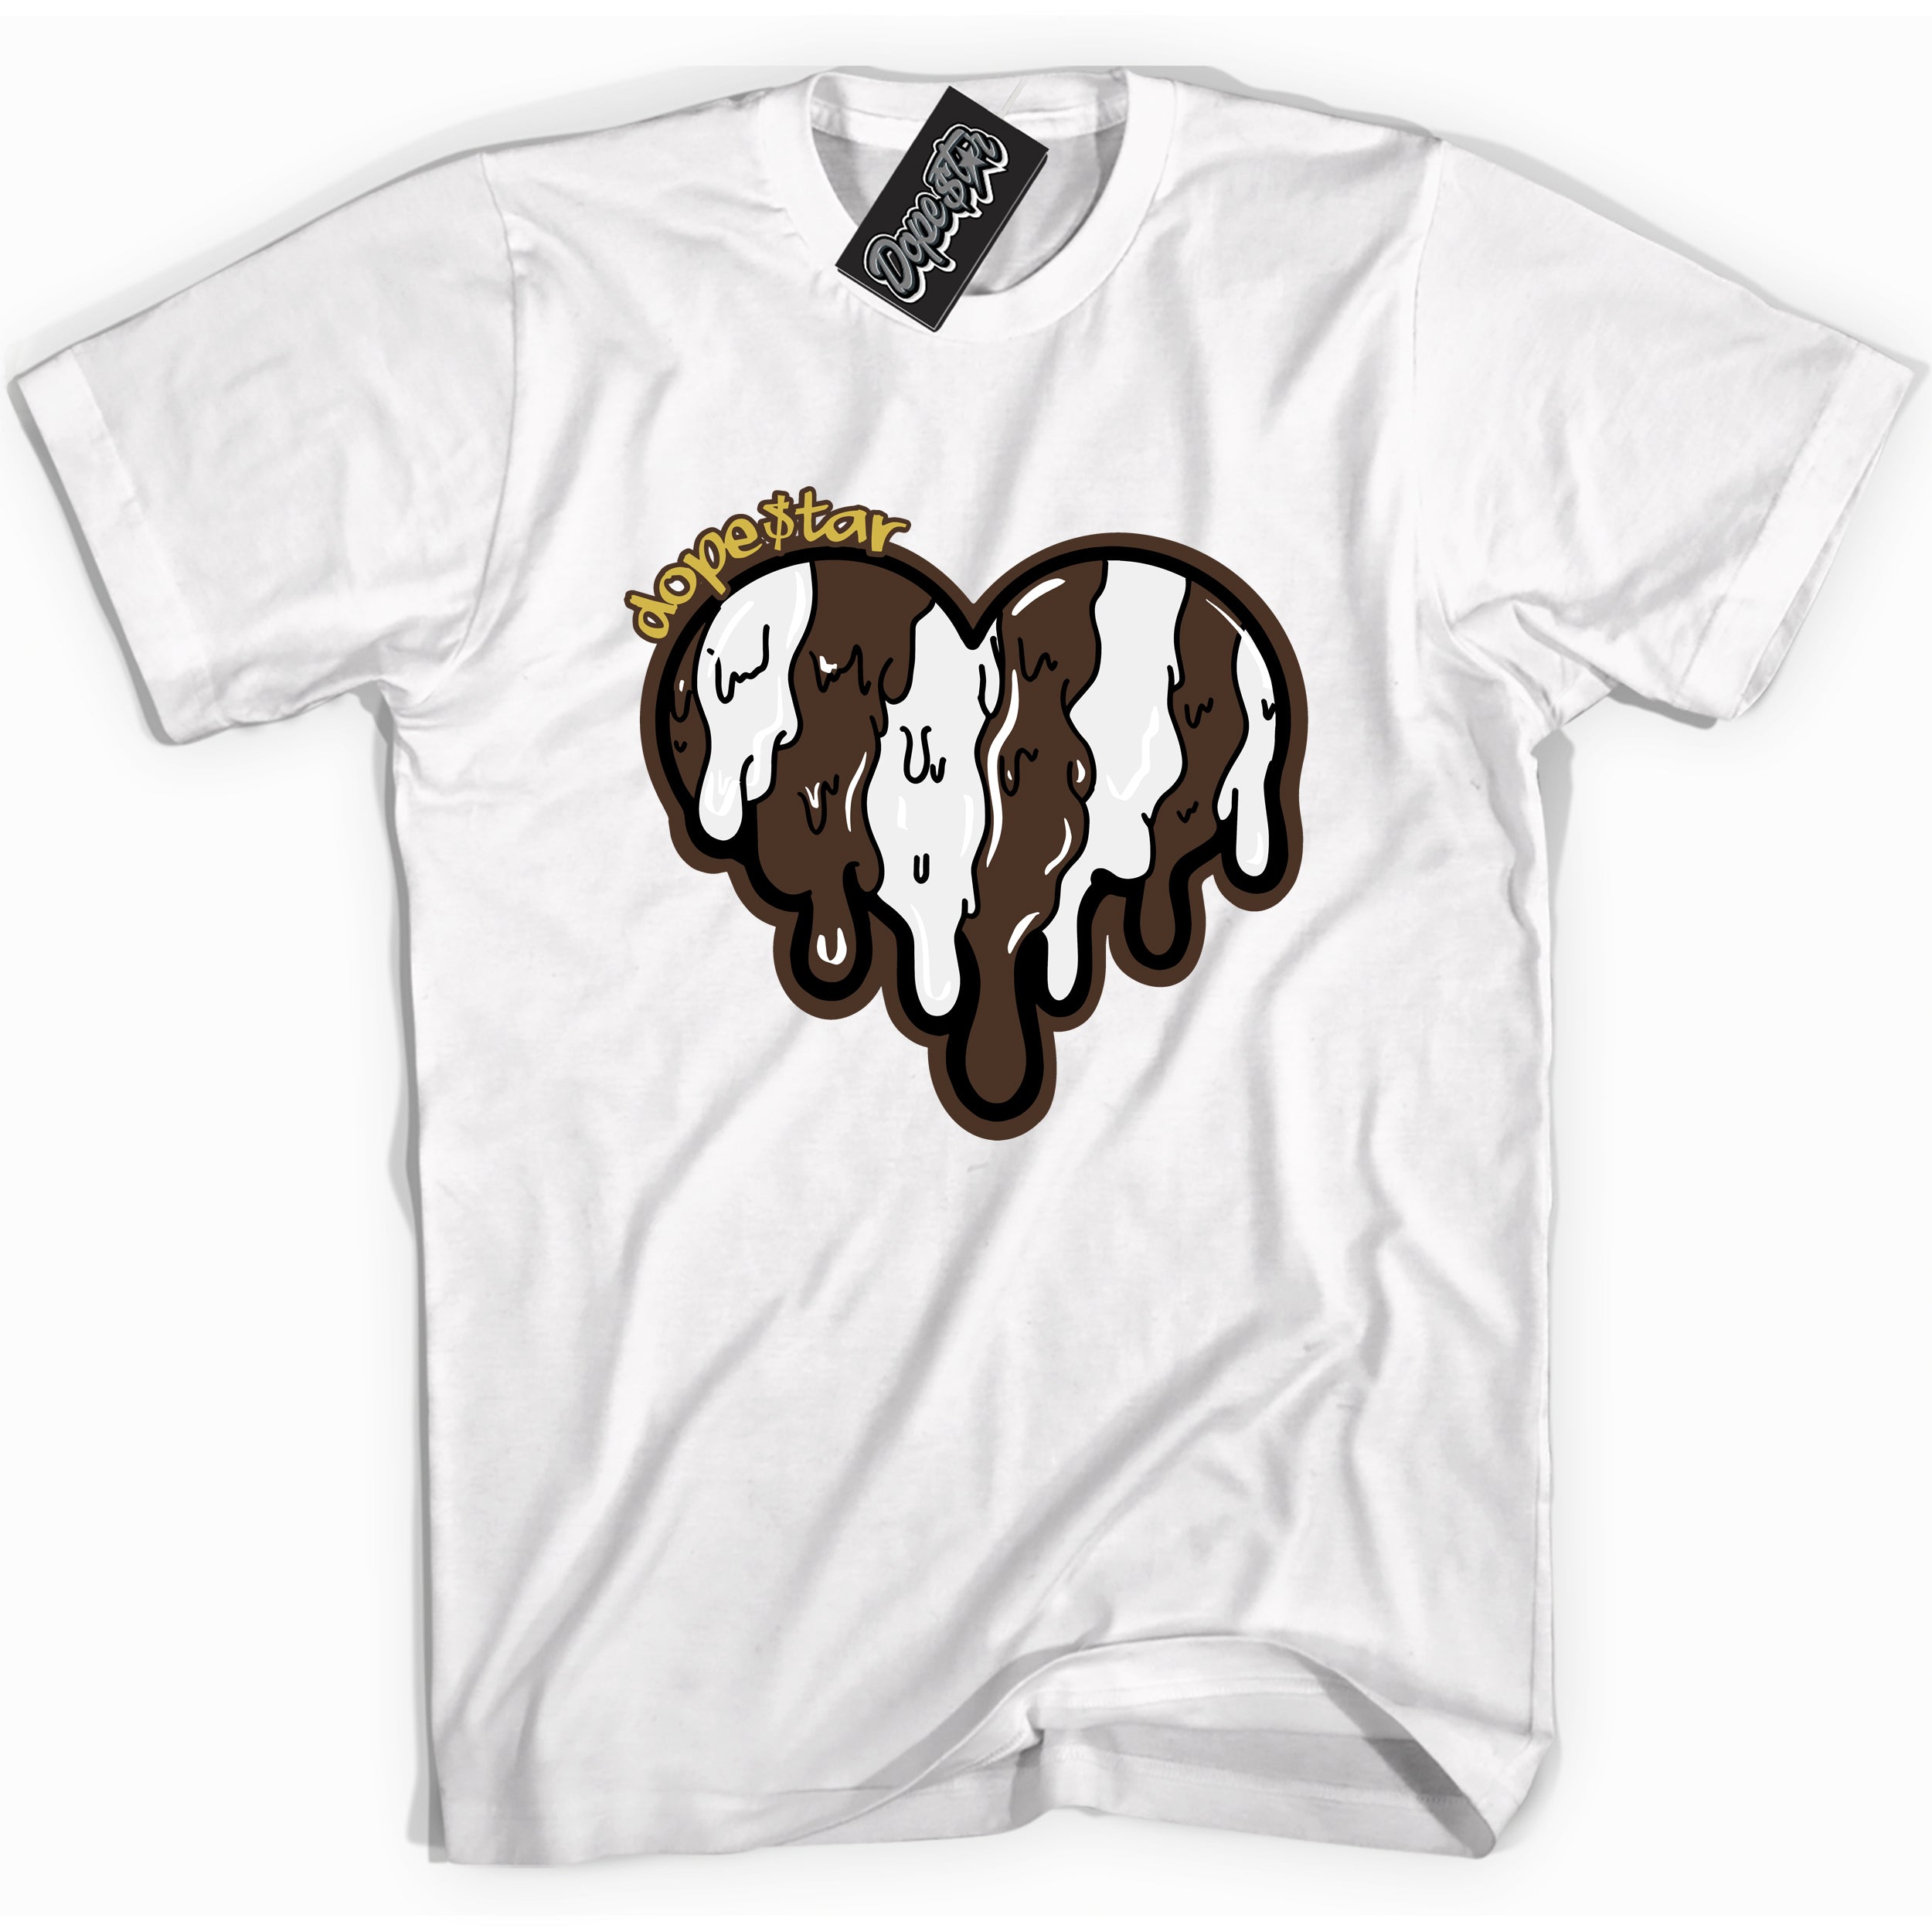 Cool White graphic tee with “ Melting Heart ” design, that perfectly matches Palomino 1s sneakers 